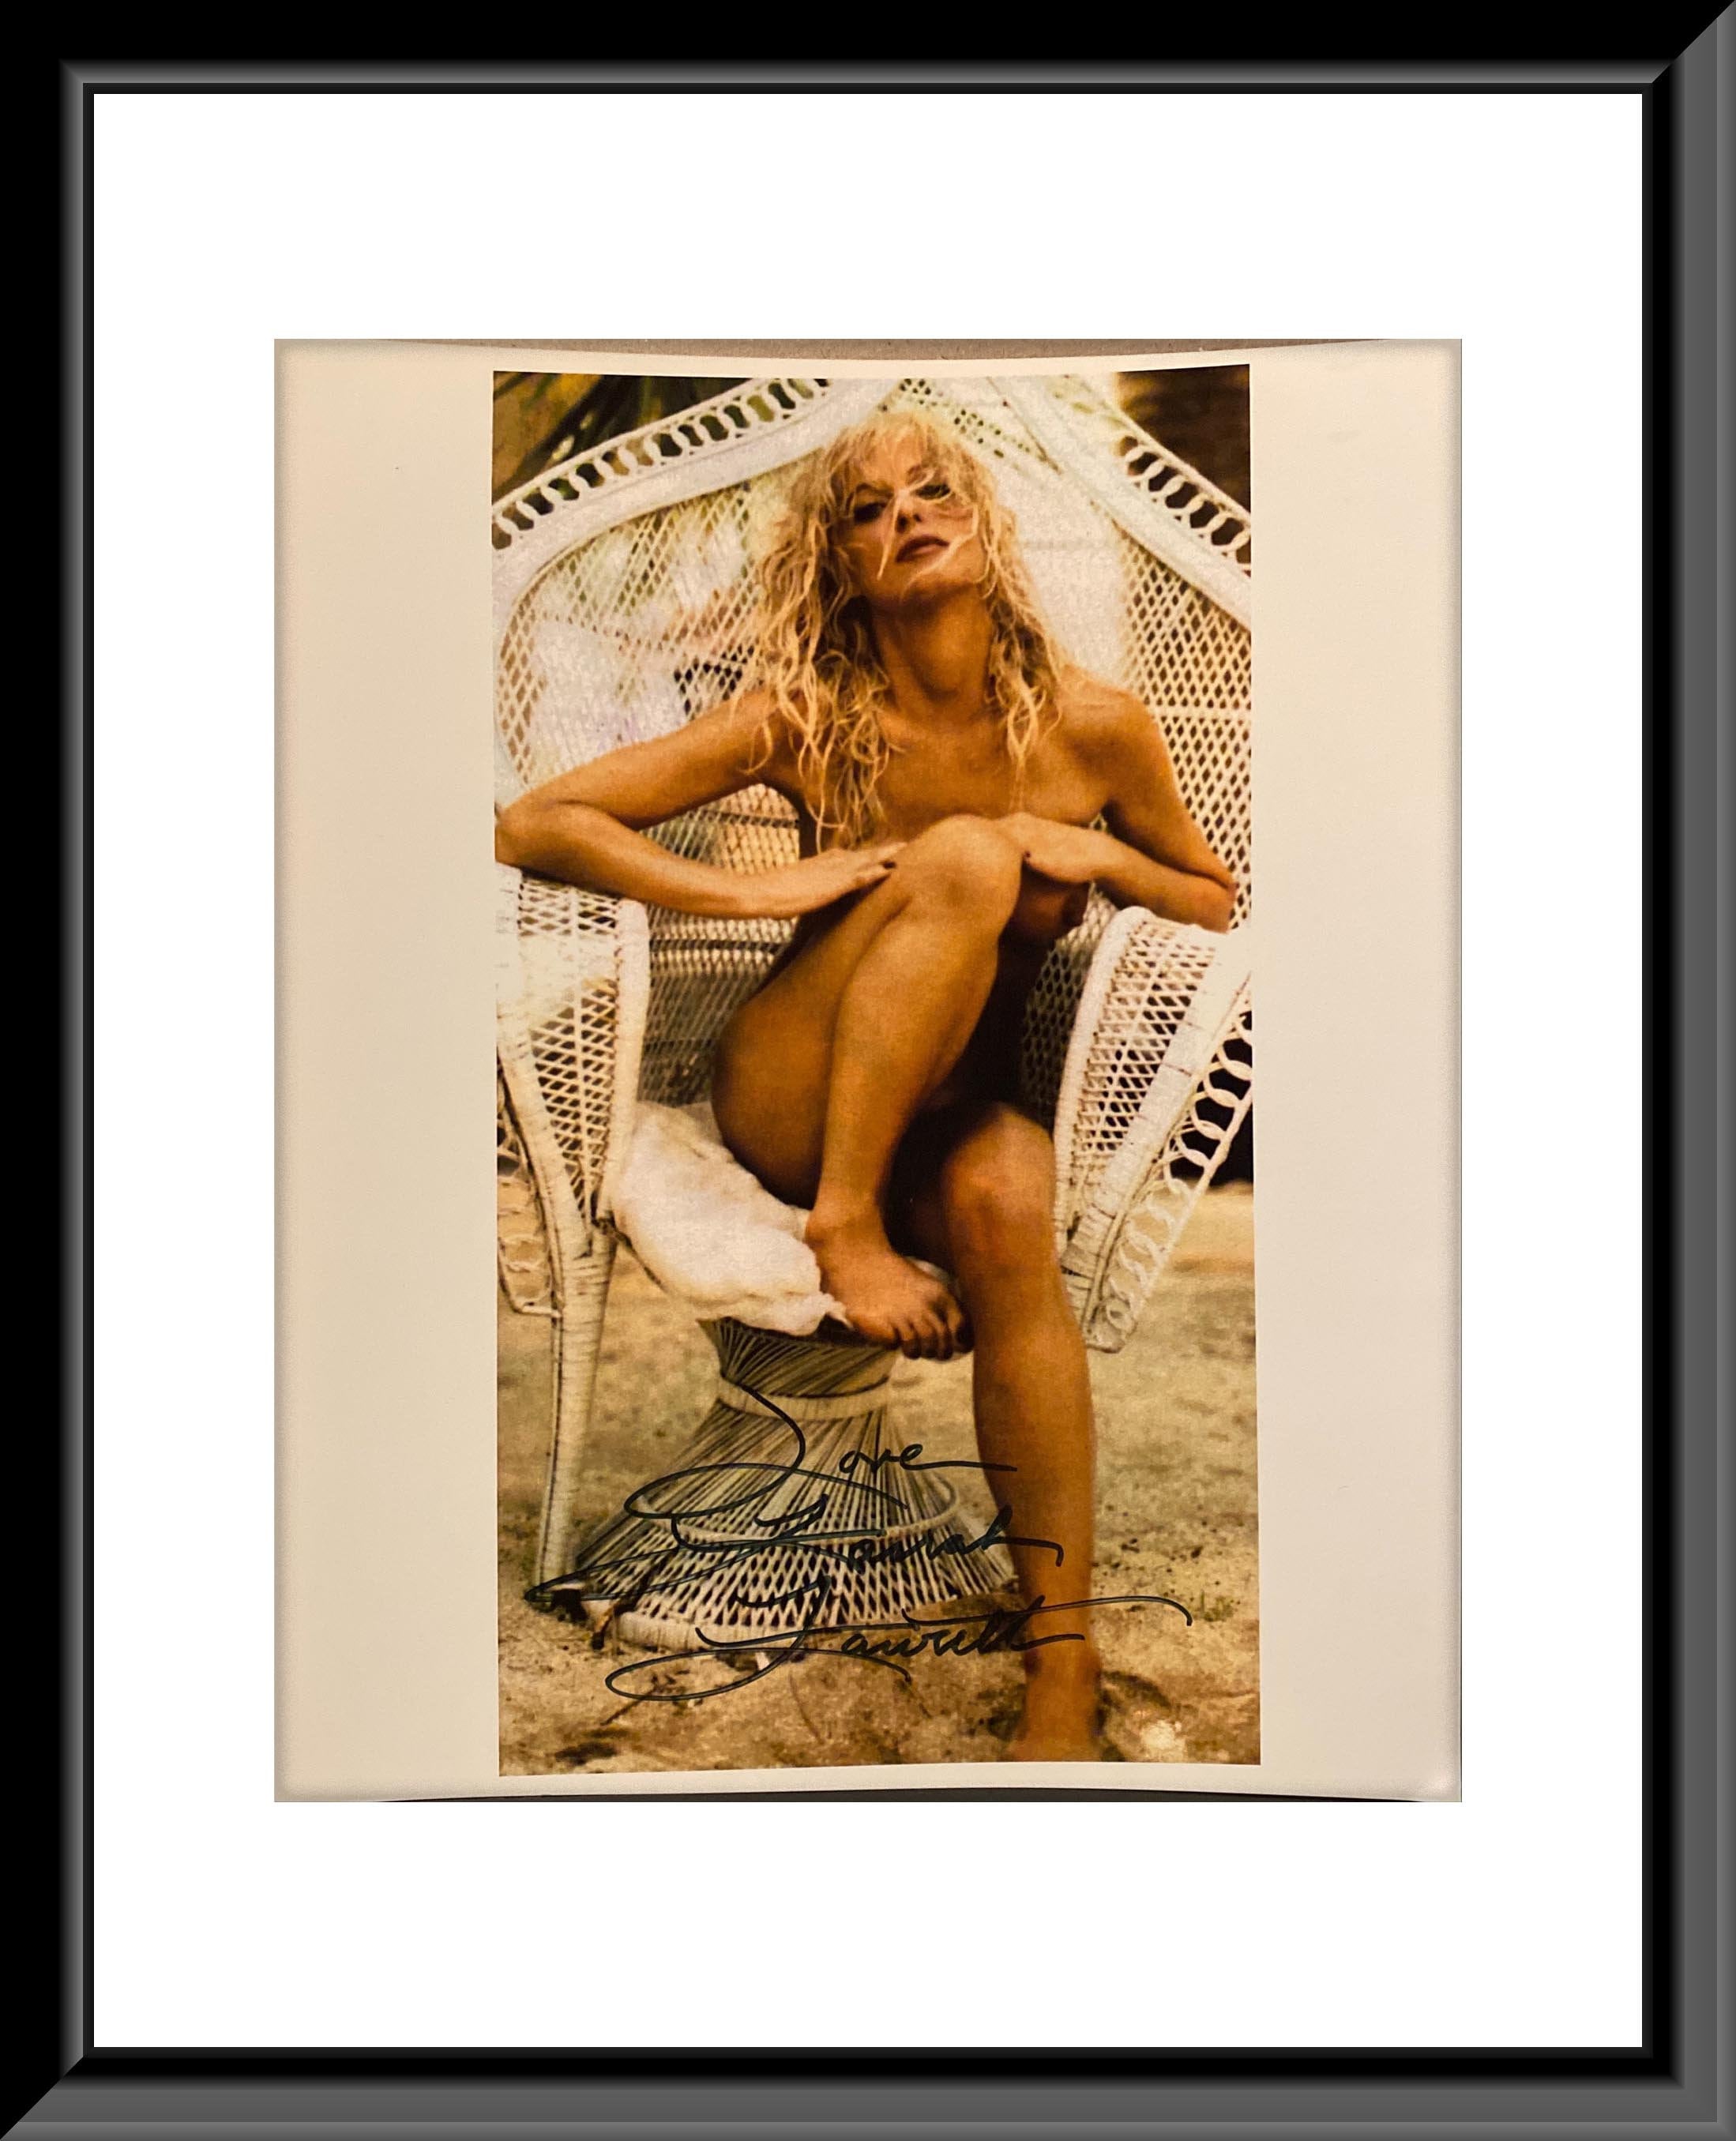 anthony varca recommends farah fawcett playboy spread pic